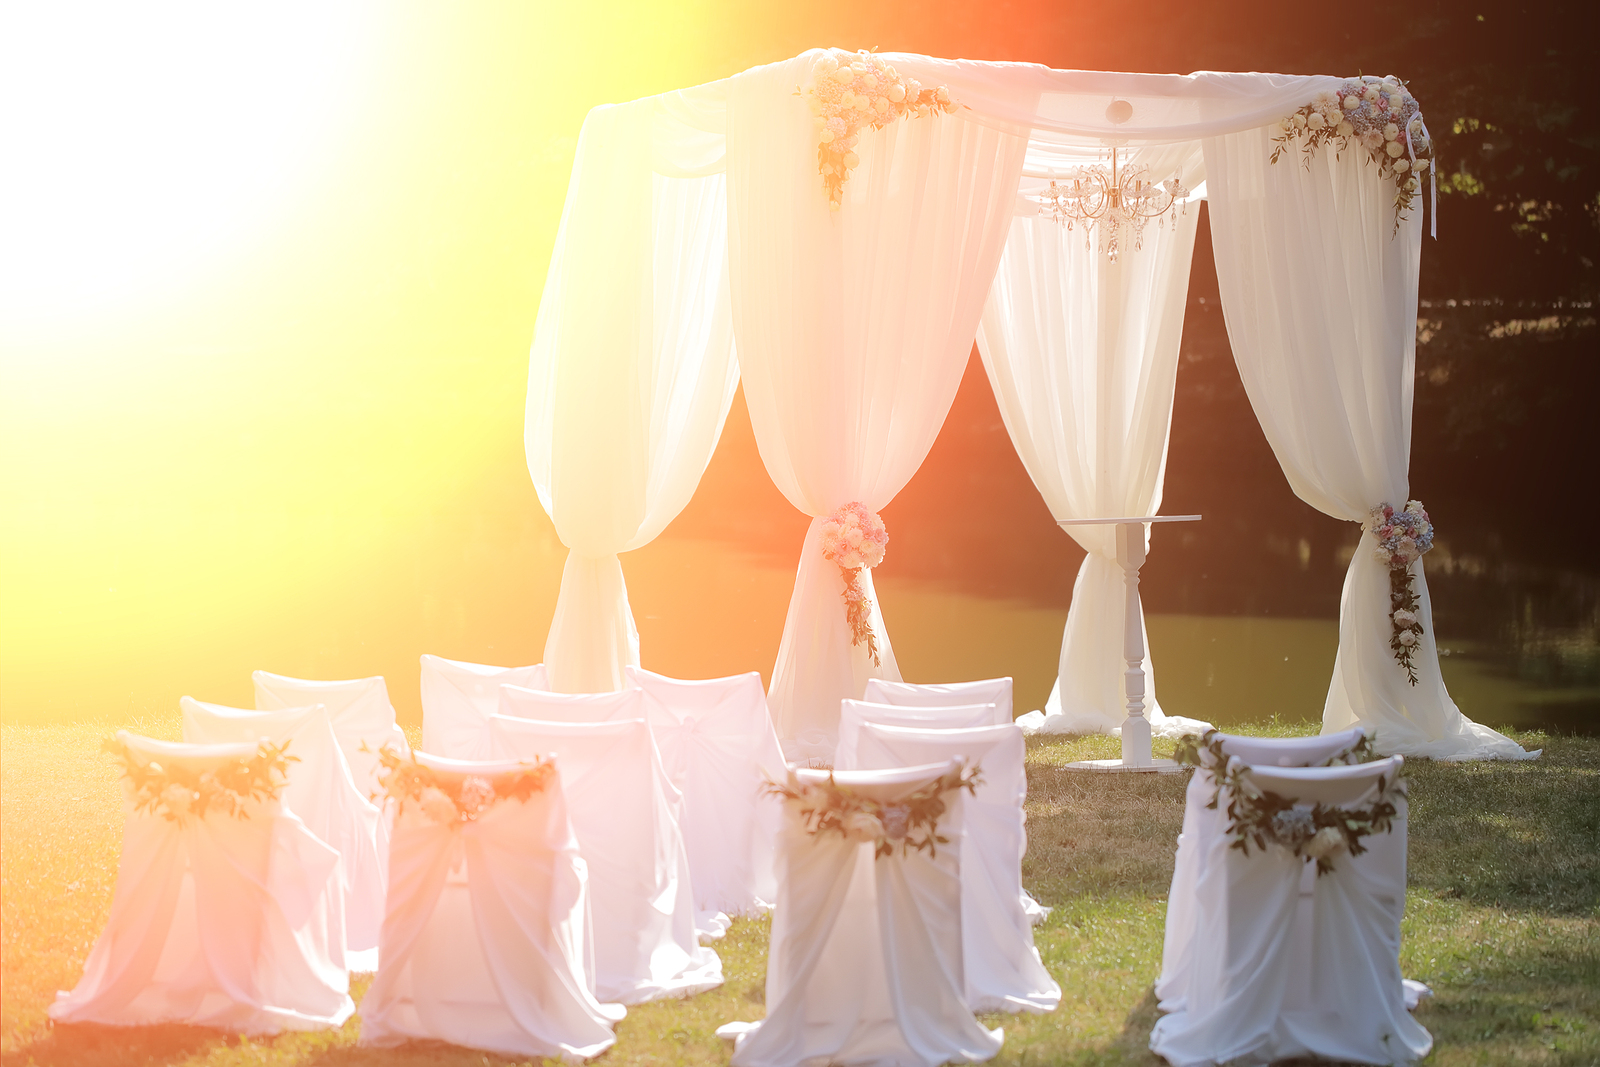 How to Host an At-Home Wedding Without Losing Your Mind